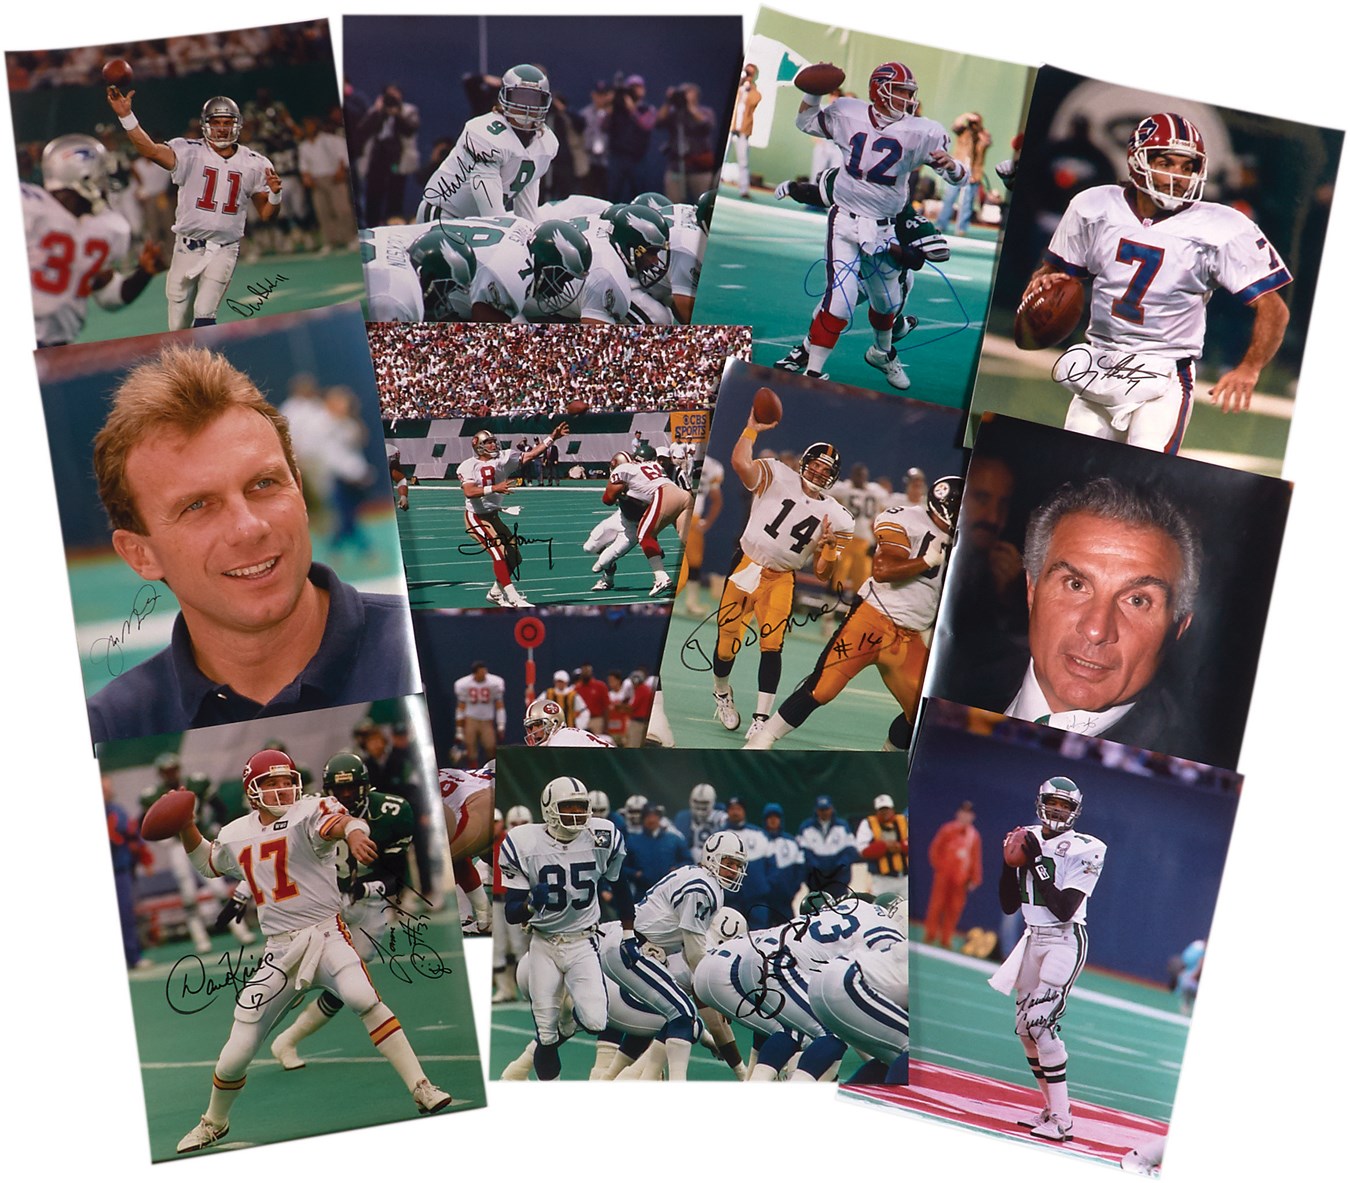 1980s-90s "NFL Quarterbacks" 16x20” In Person Signed Photographs from VIP Photographer Richard Brightly (12)